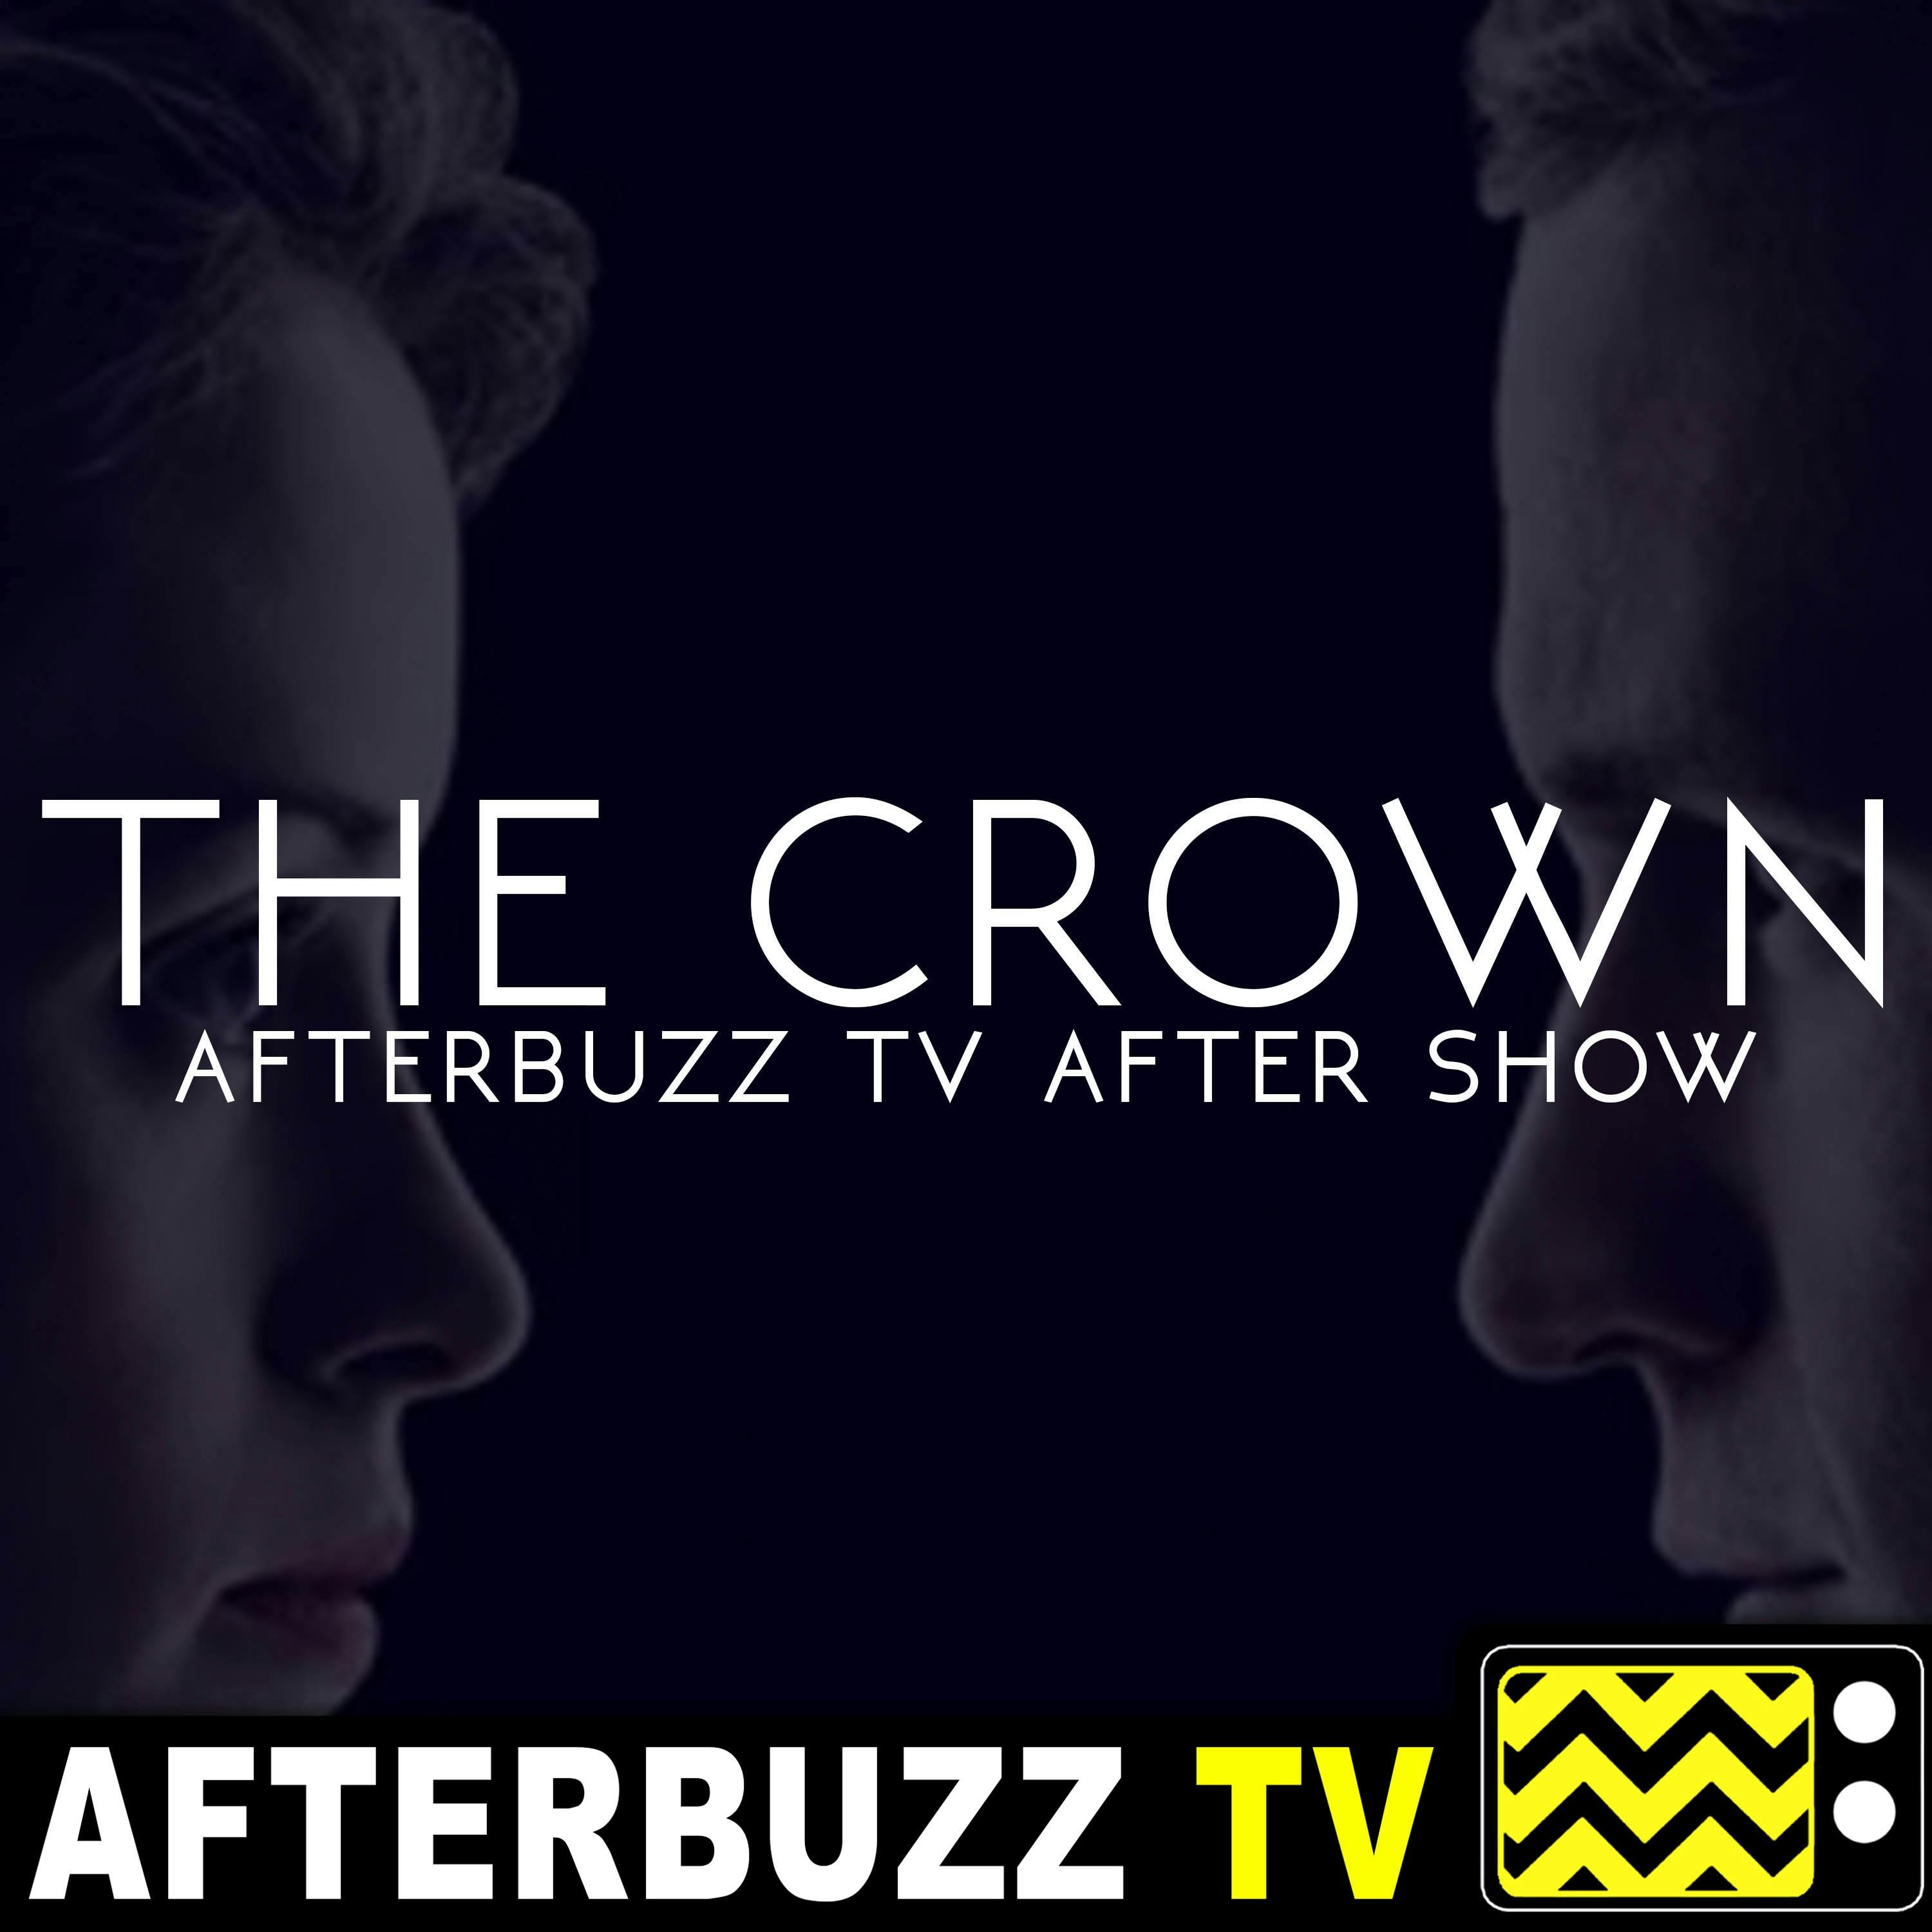 The Crown S:1 | Smoke and Mirrors; Gelignite E:5 & E:6 | AfterBuzz TV AfterShow